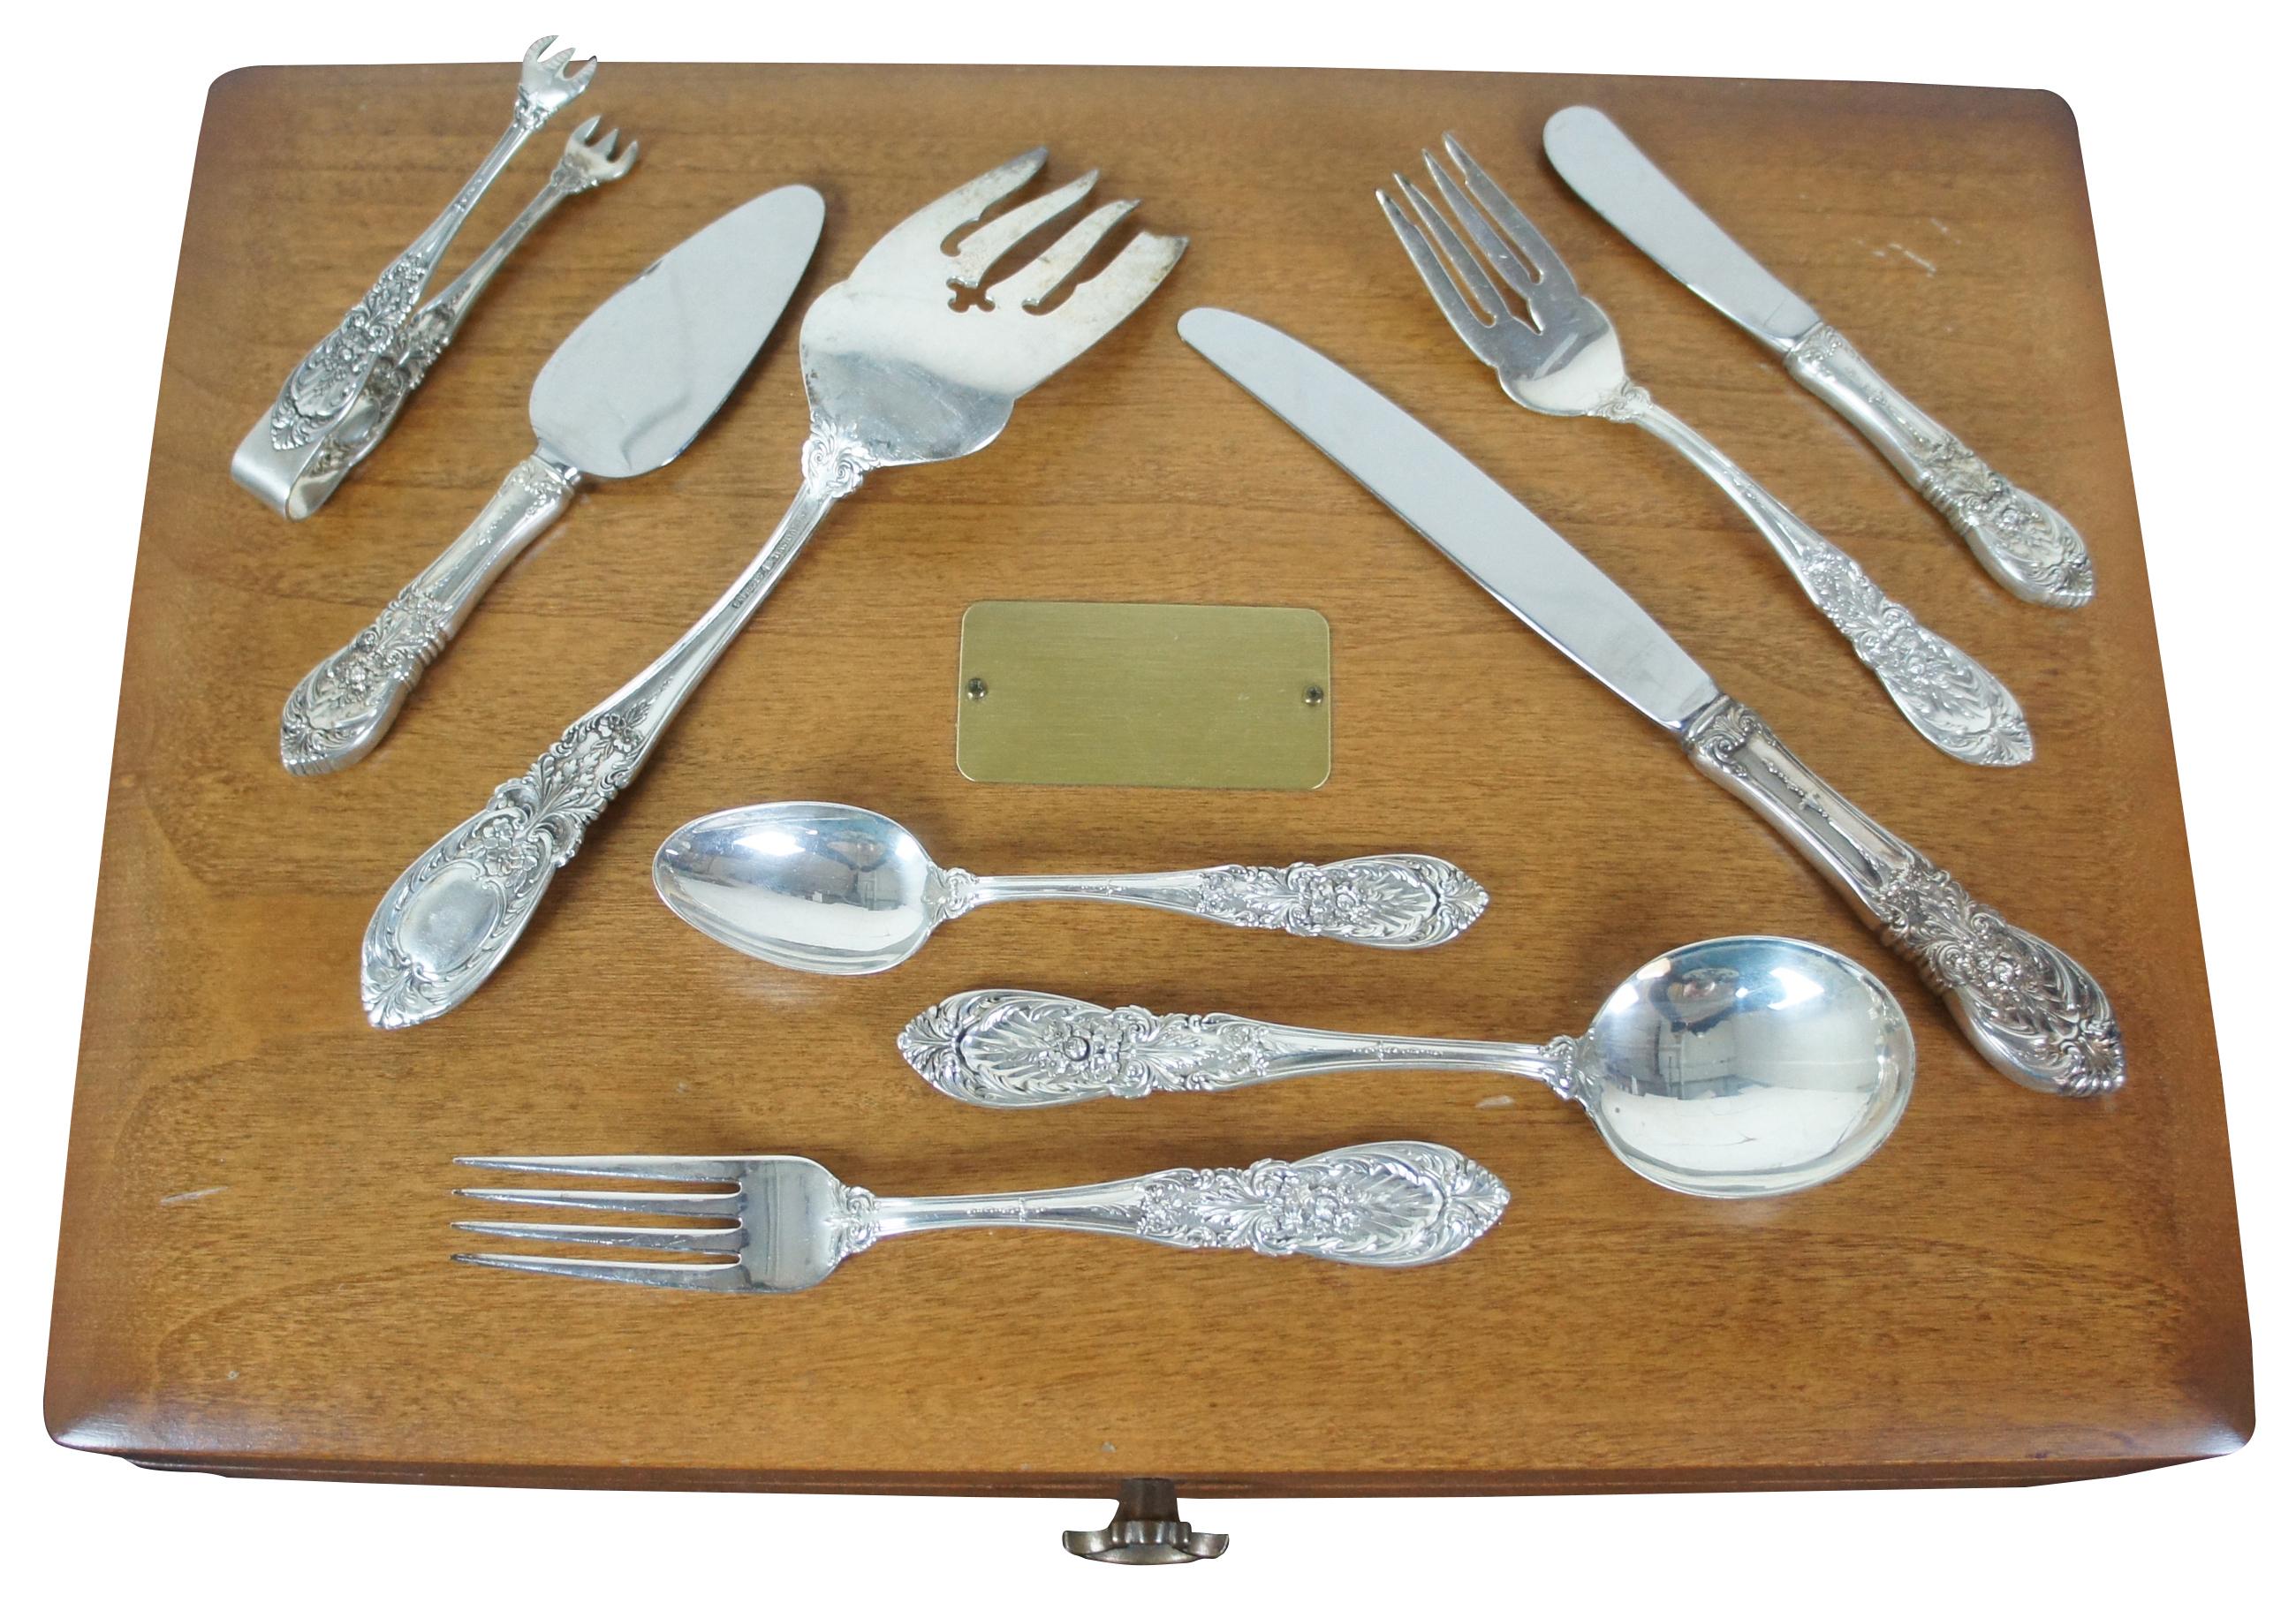 106 piece set of sterling silver flatware by International Silver Co in the Richelieu pattern (first produced in 1935) and wooden storage chest.

Measures: Chest - 16” x 11.5” x 3.5” / 18 table knives - 9.25” x 0.75” - 74.3 g / 12 spreaders -